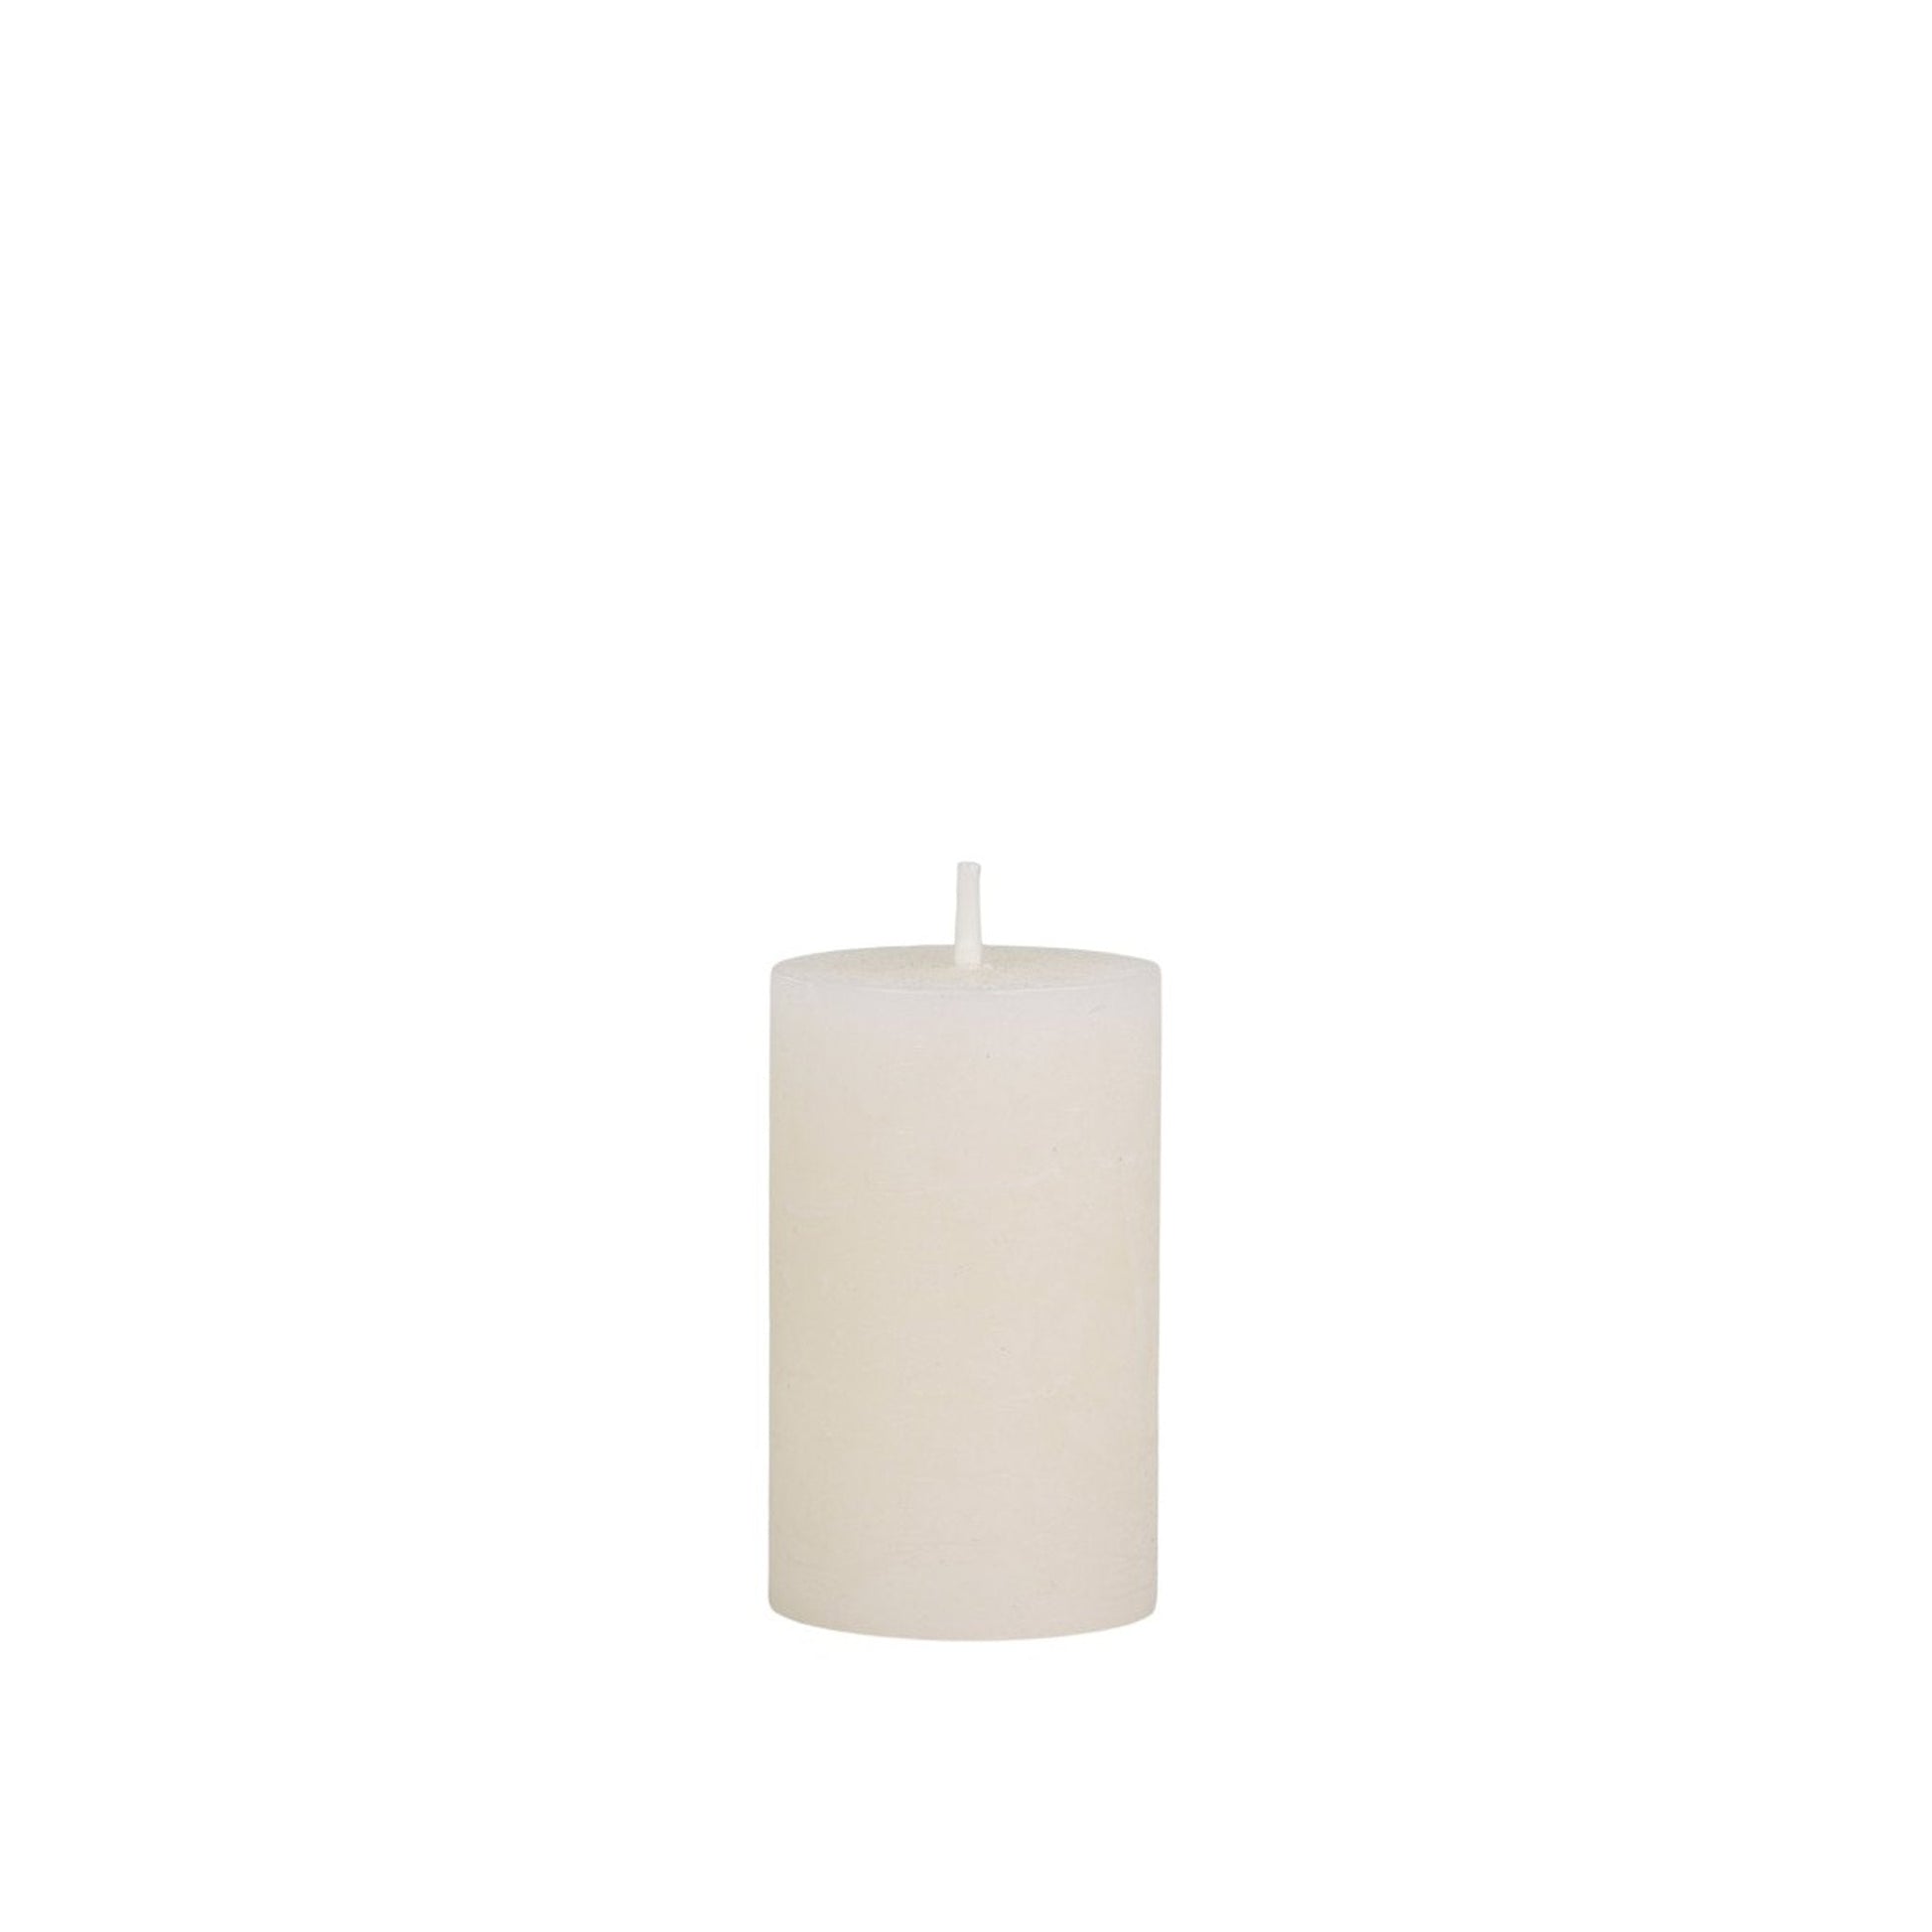 Cream Rustic Pillar Candle 16 hours - Bumble Living